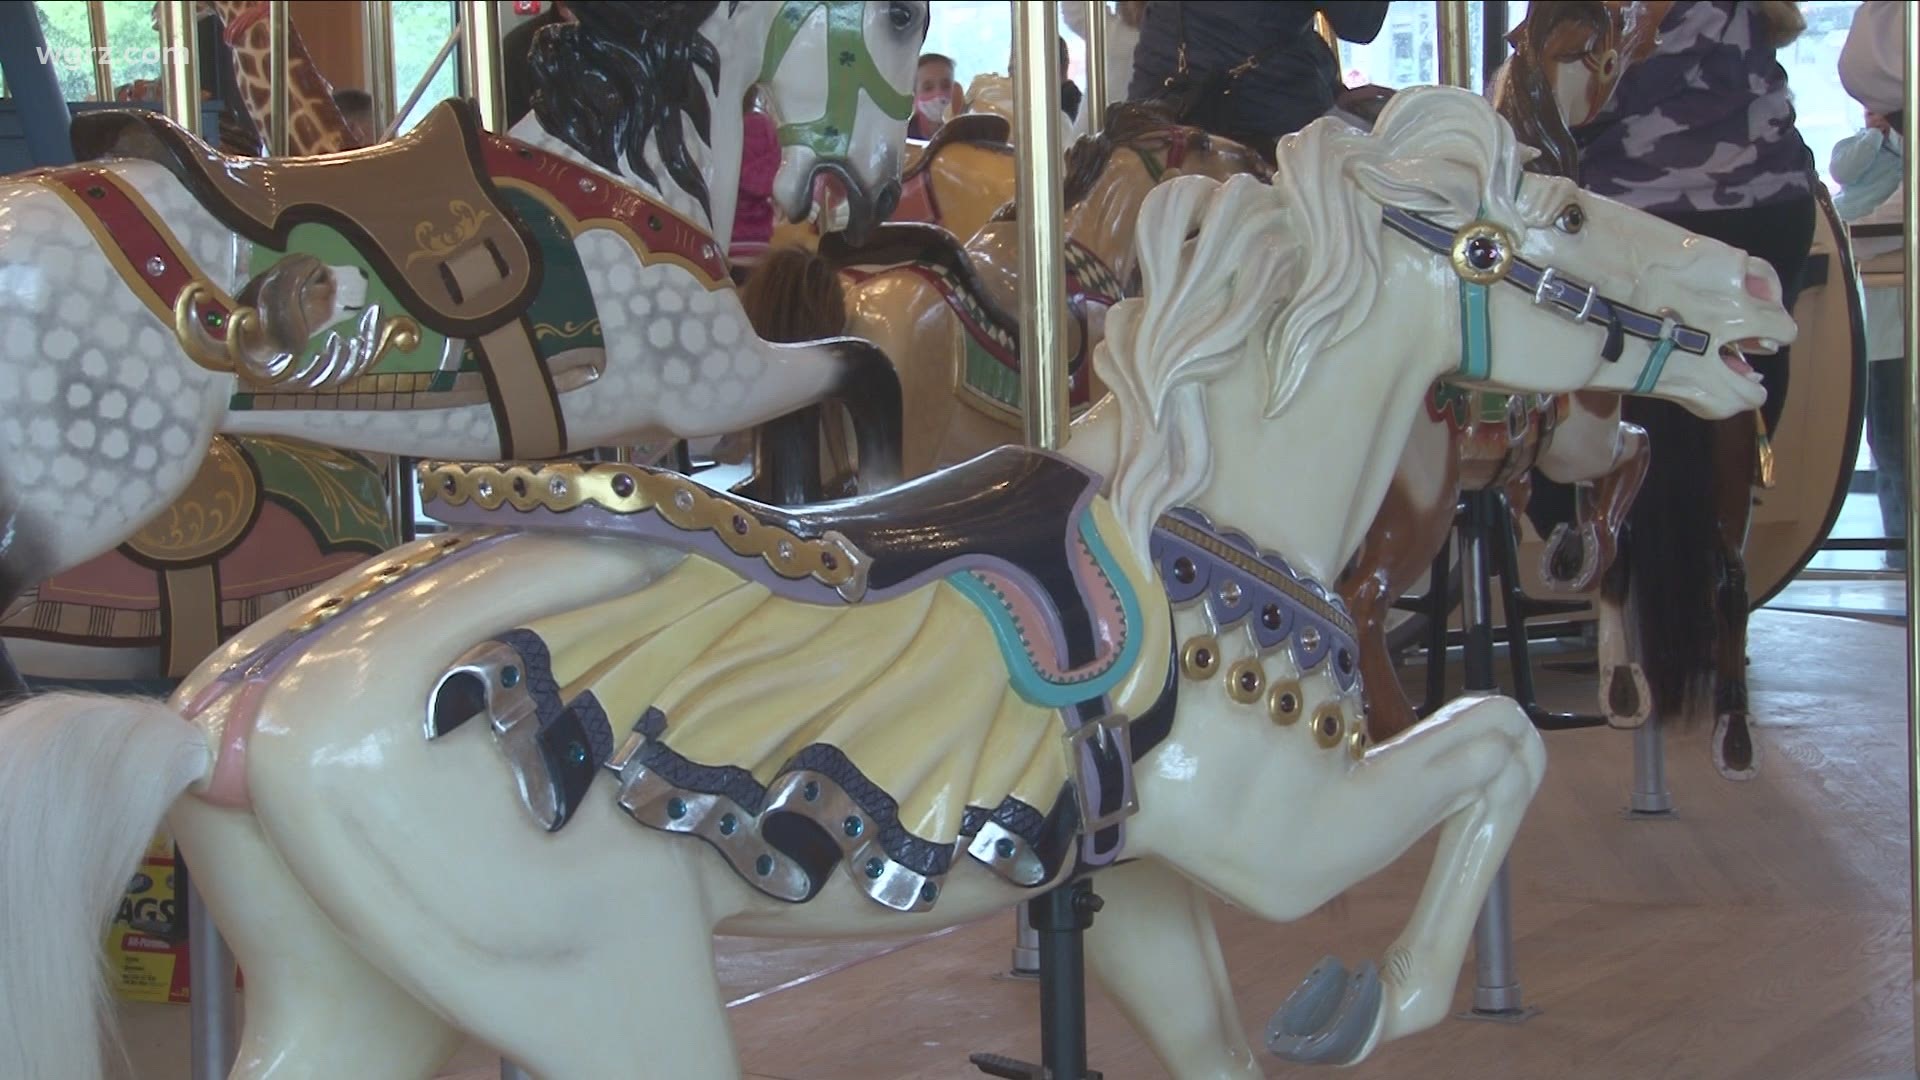 Historic Carousel Take A Turn At Canalside